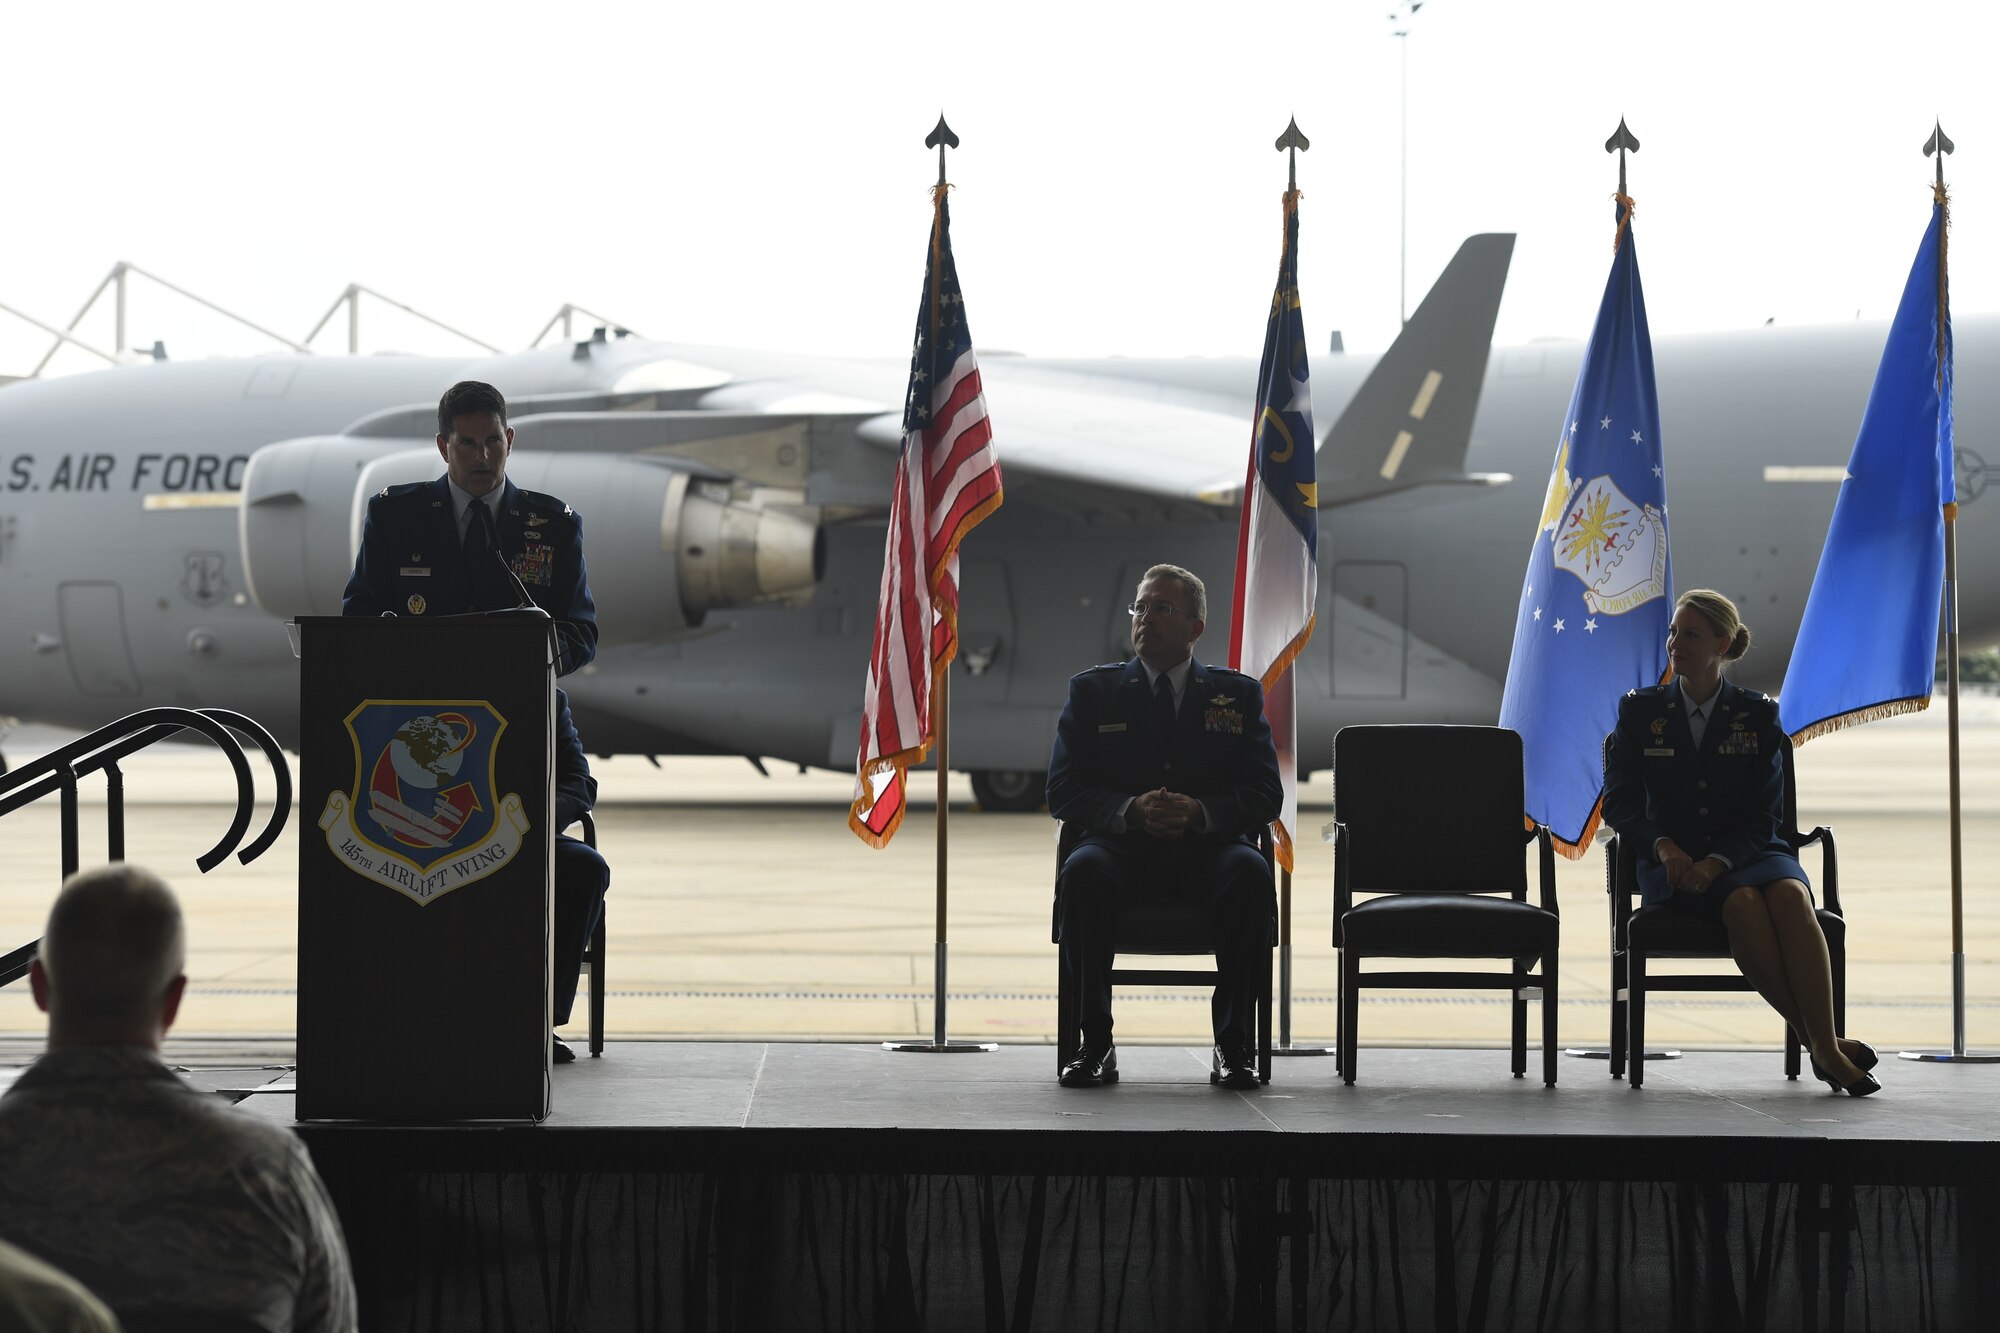 U.S. Air Force Col. Michael Gerock, commander of the 145th Airlift Wing (AW), gives a final address to members of the unit during a Change of Command Ceremony held at the North Carolina Air National Guard Base, Charlotte Douglas International Airport, June 9, 2018. Gerock will will relinquish command to Col. Bryony Terrell who is the the first female commander for the 145th AW.